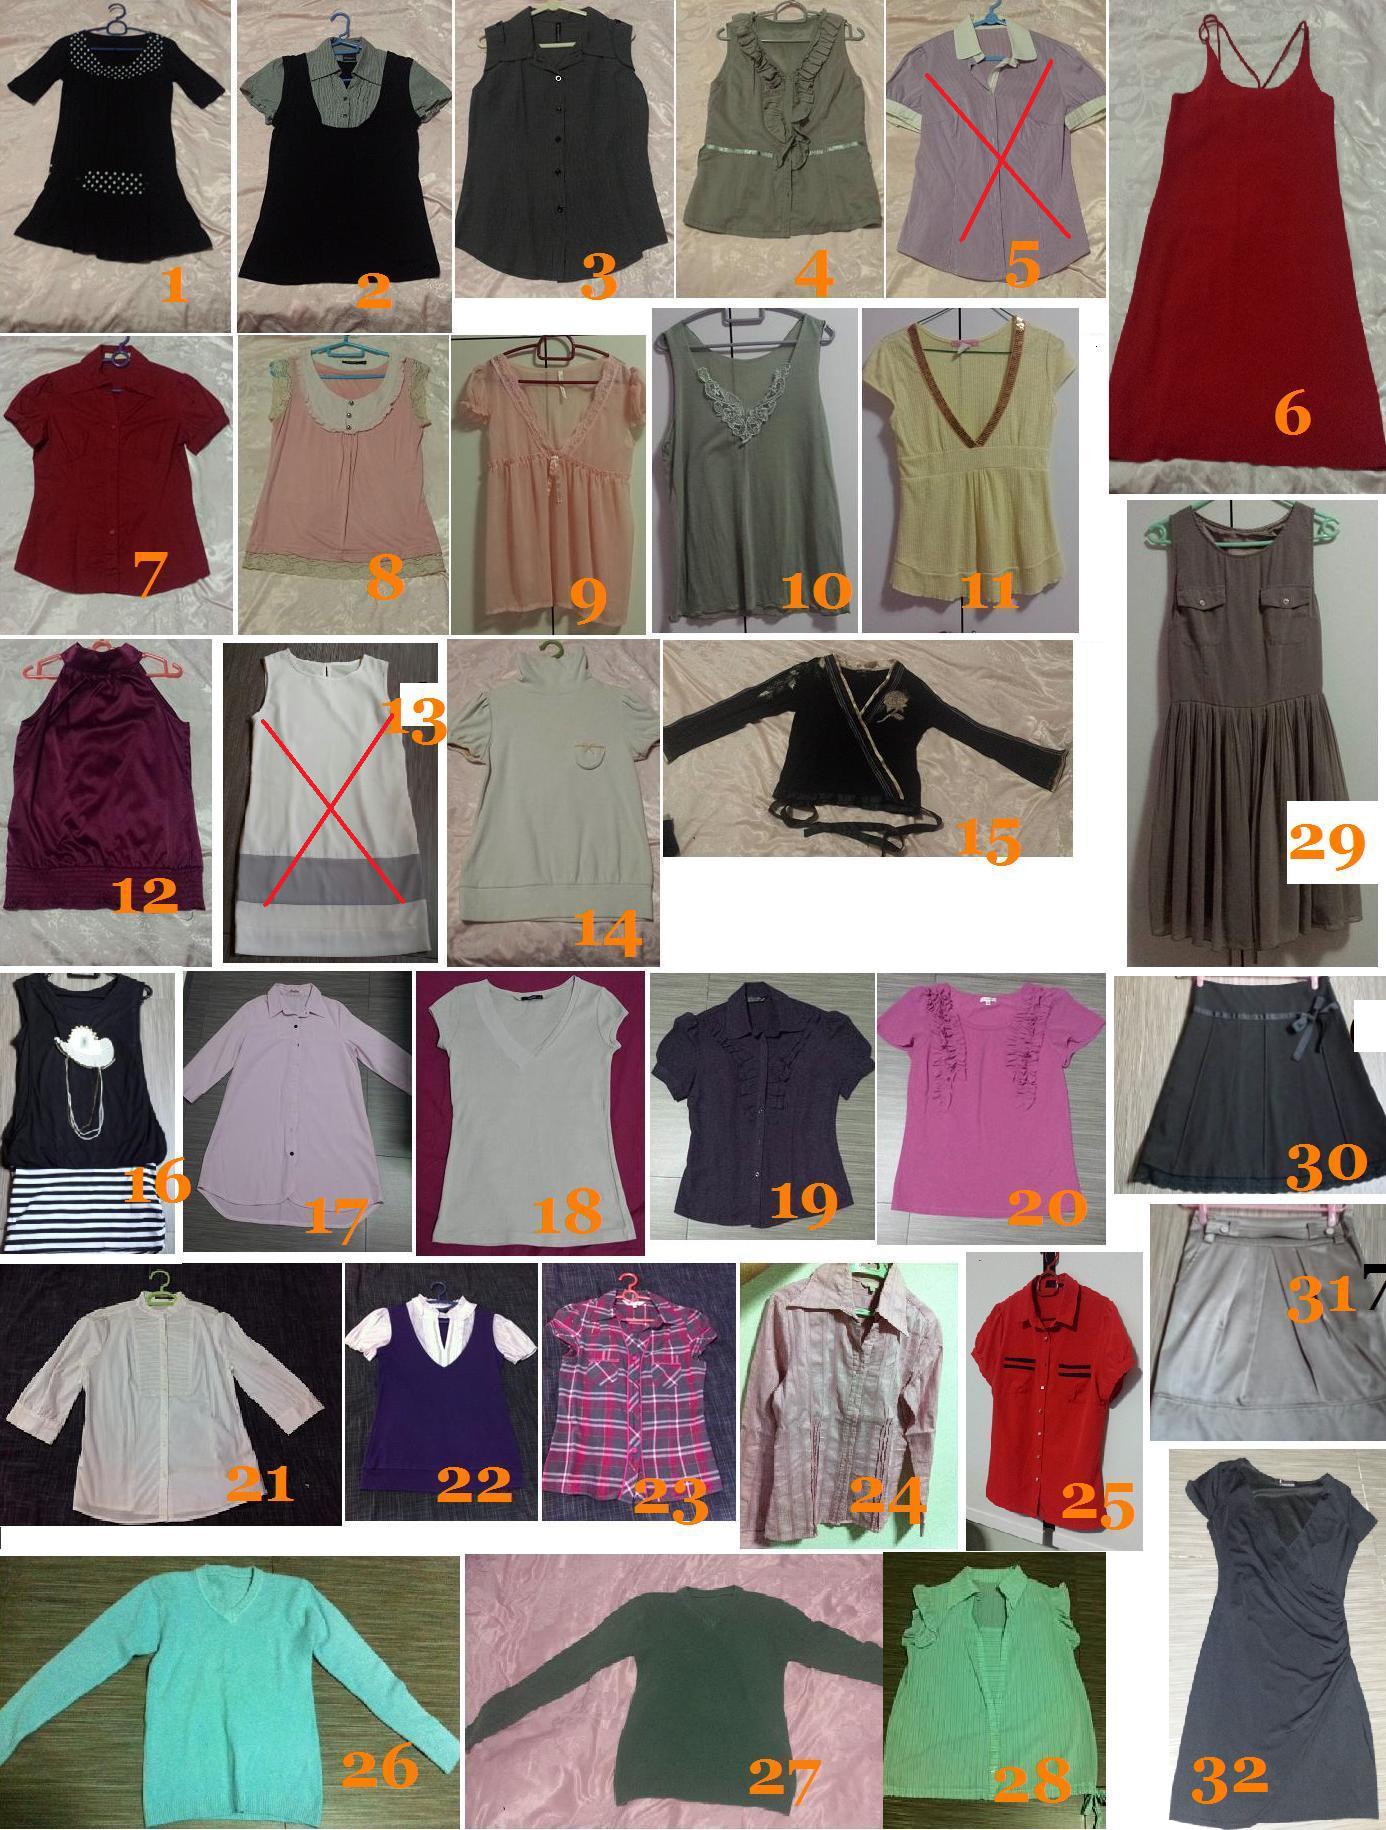 clothes clearance numbered c 15Apr21.jpg